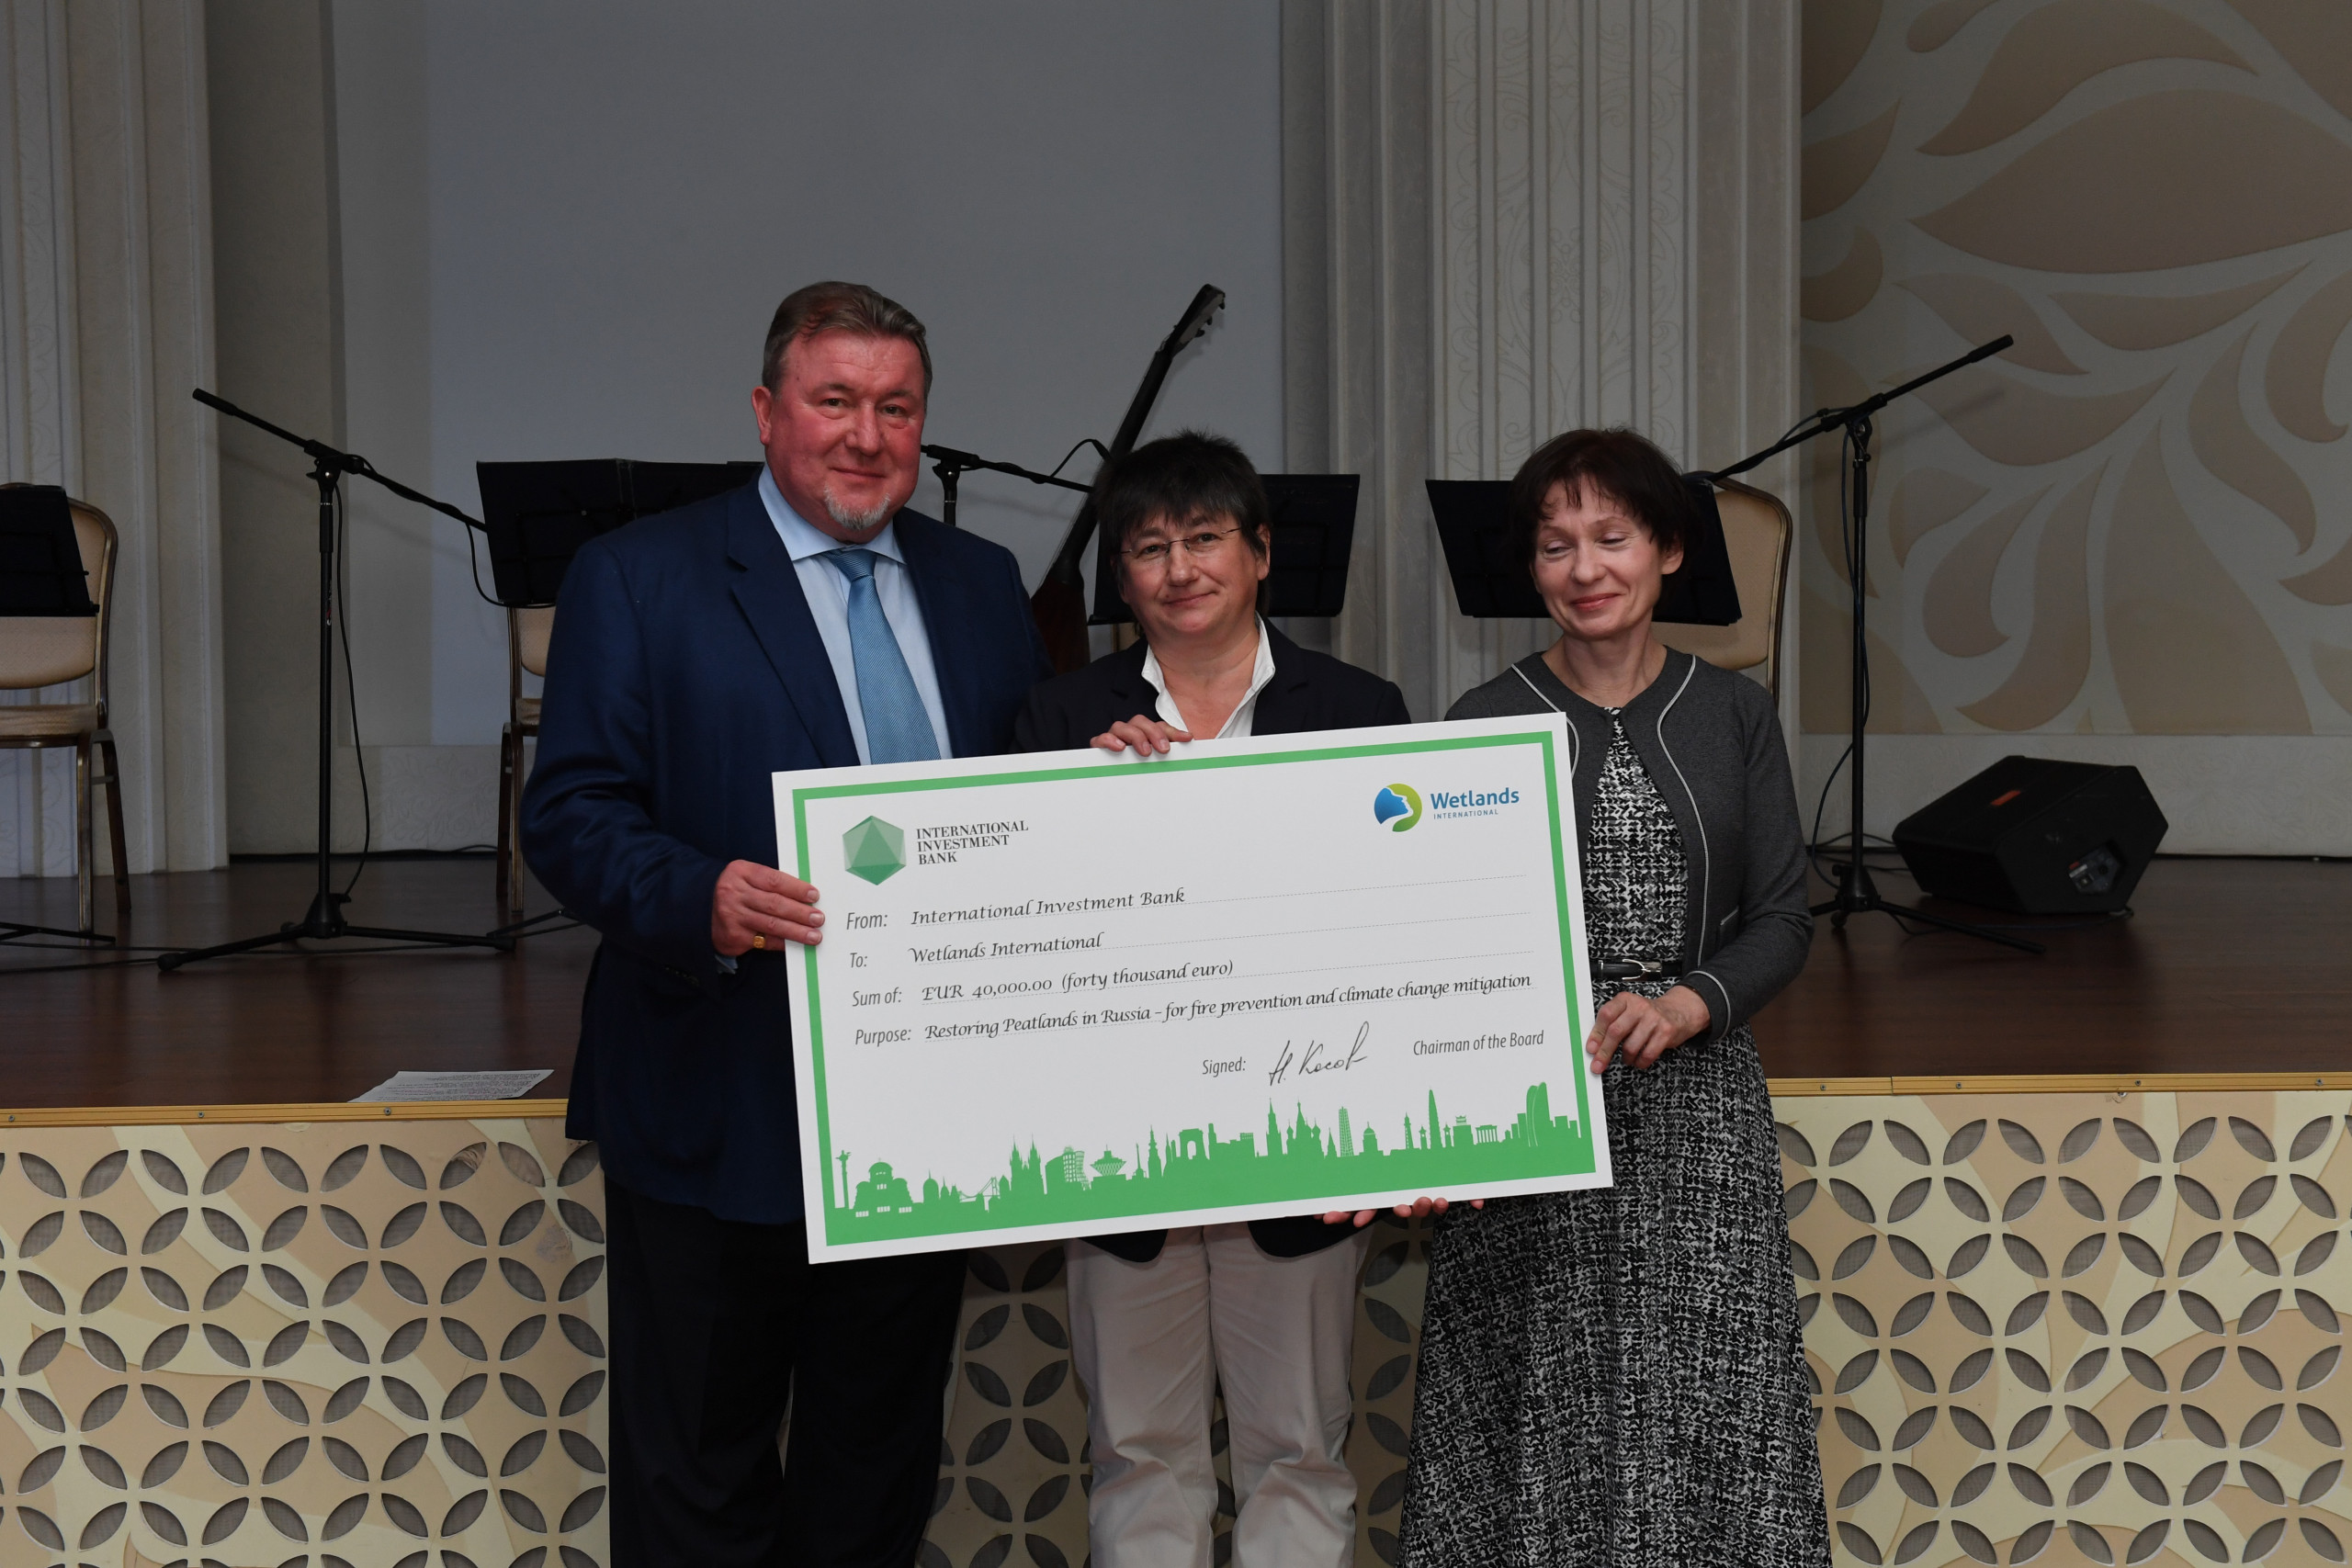 A green grant from a green bank: IIB continues to support peatlands restoration project.